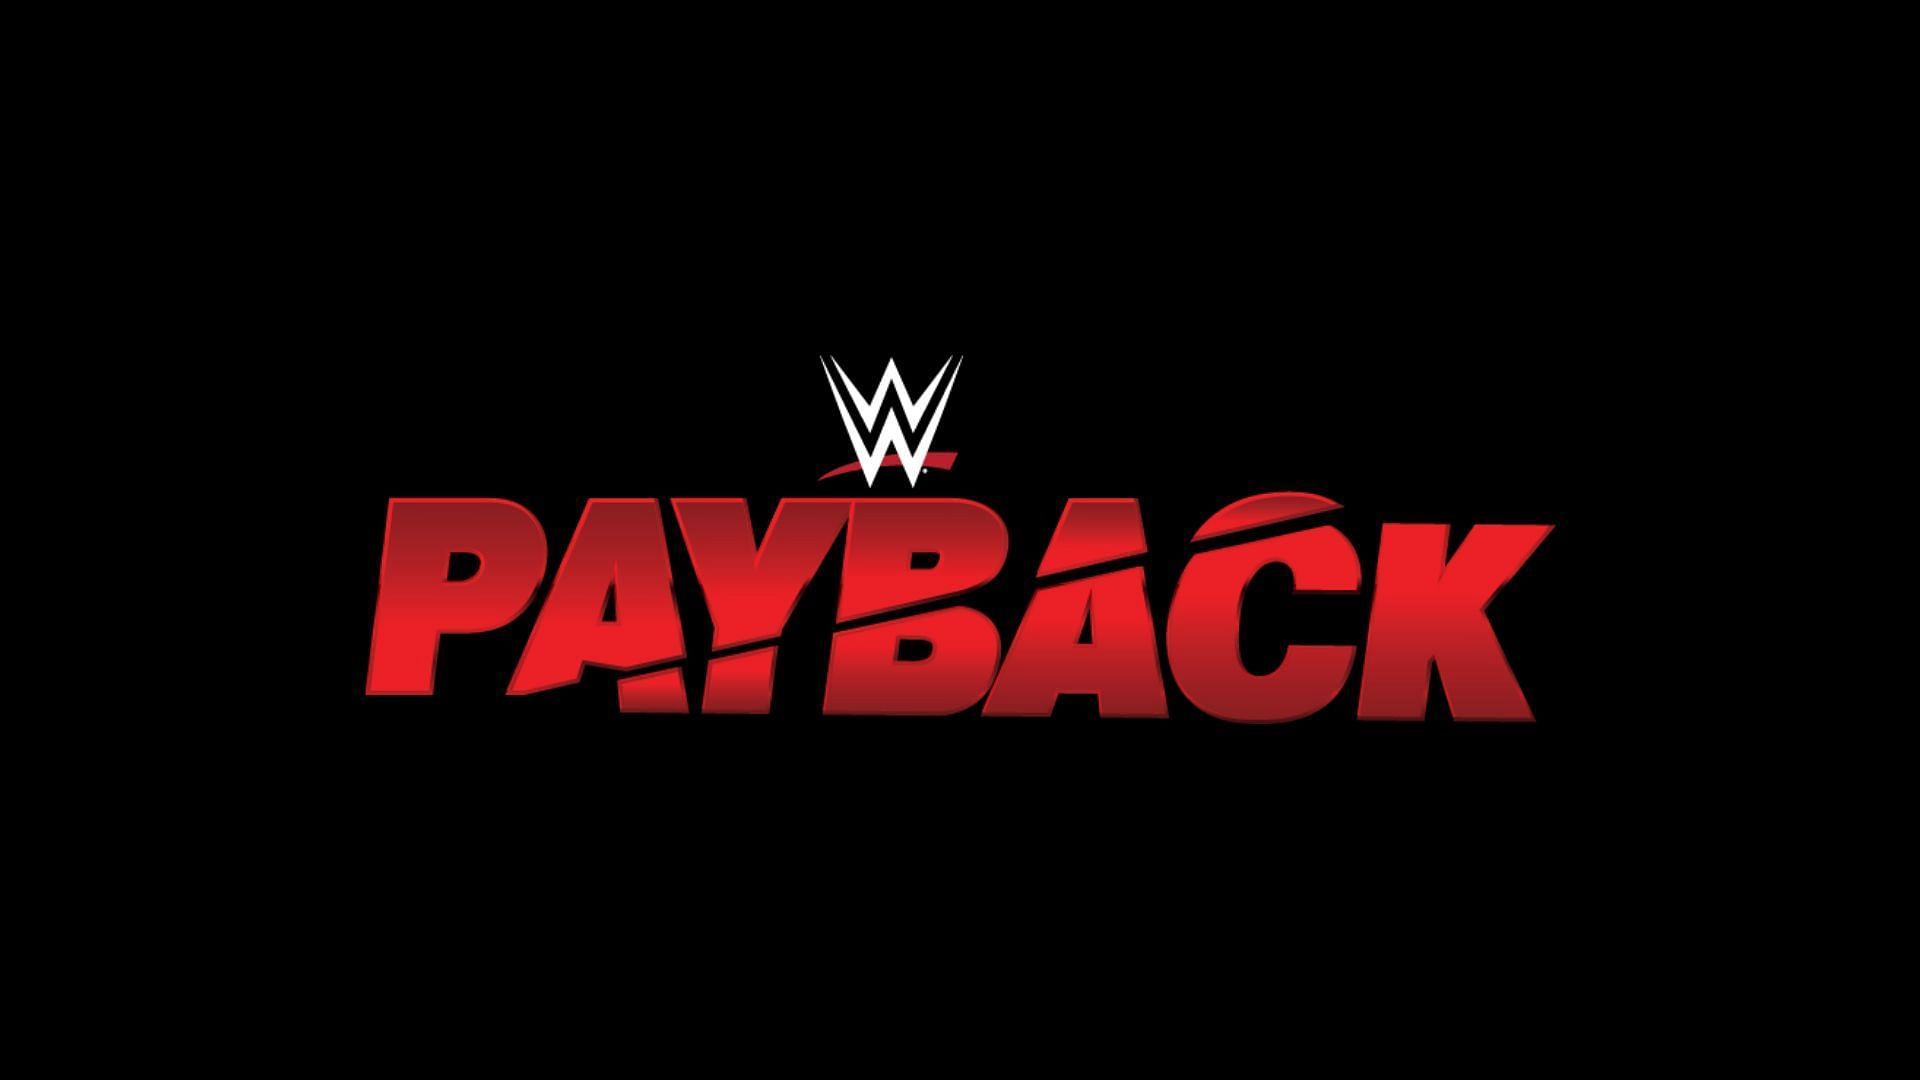 WWE Payback will feature some much anticipated contests!